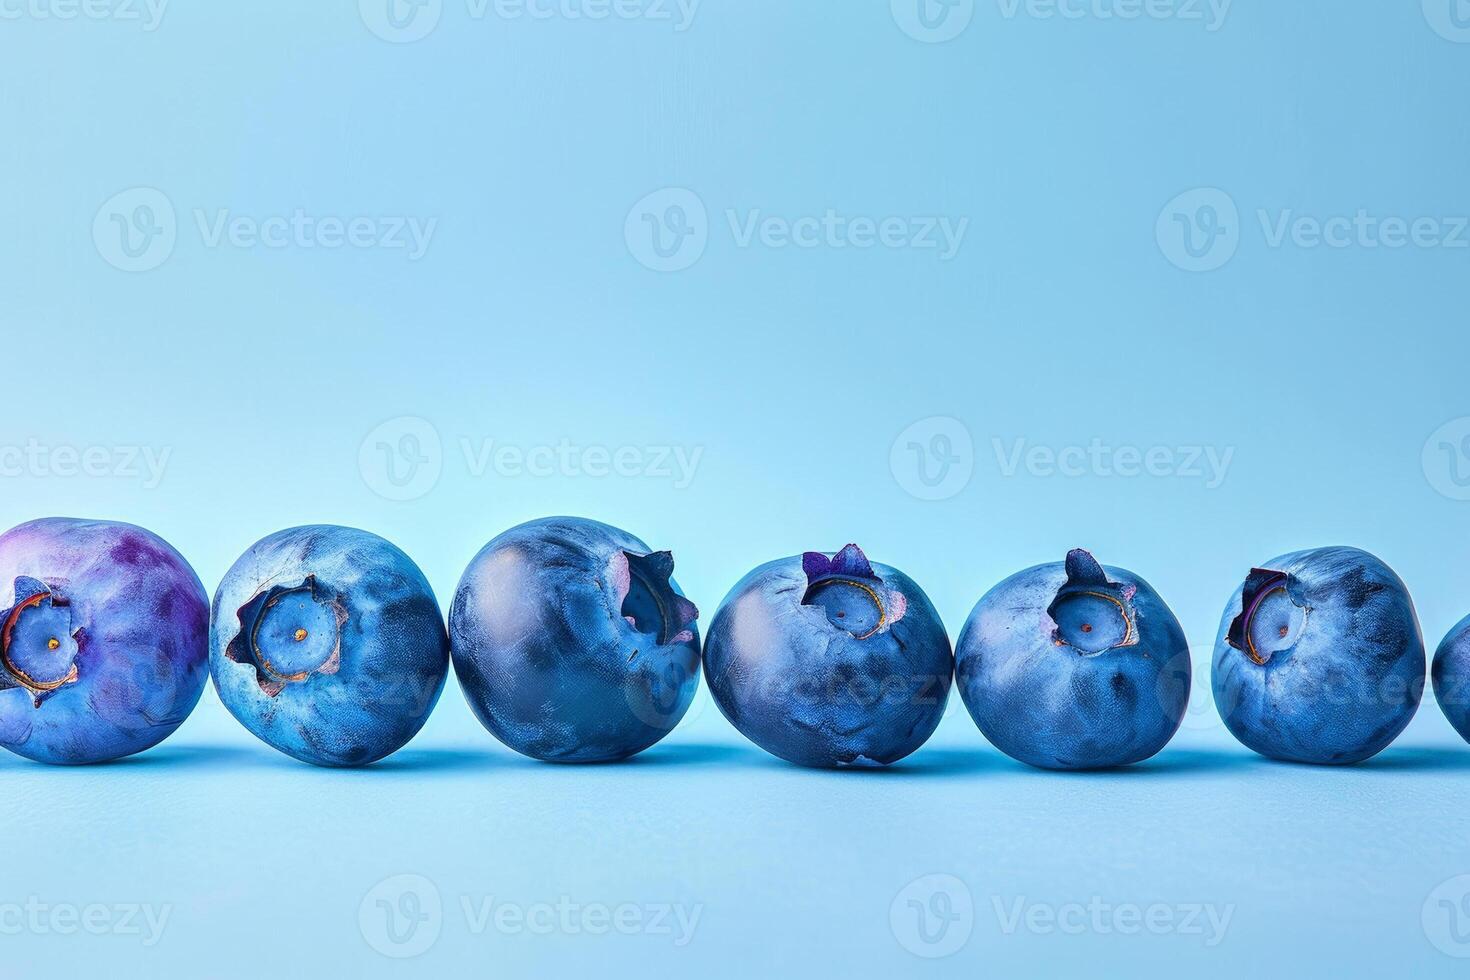 Stylized graphic of multiple blueberries in a descending size order, gradient blue background photo